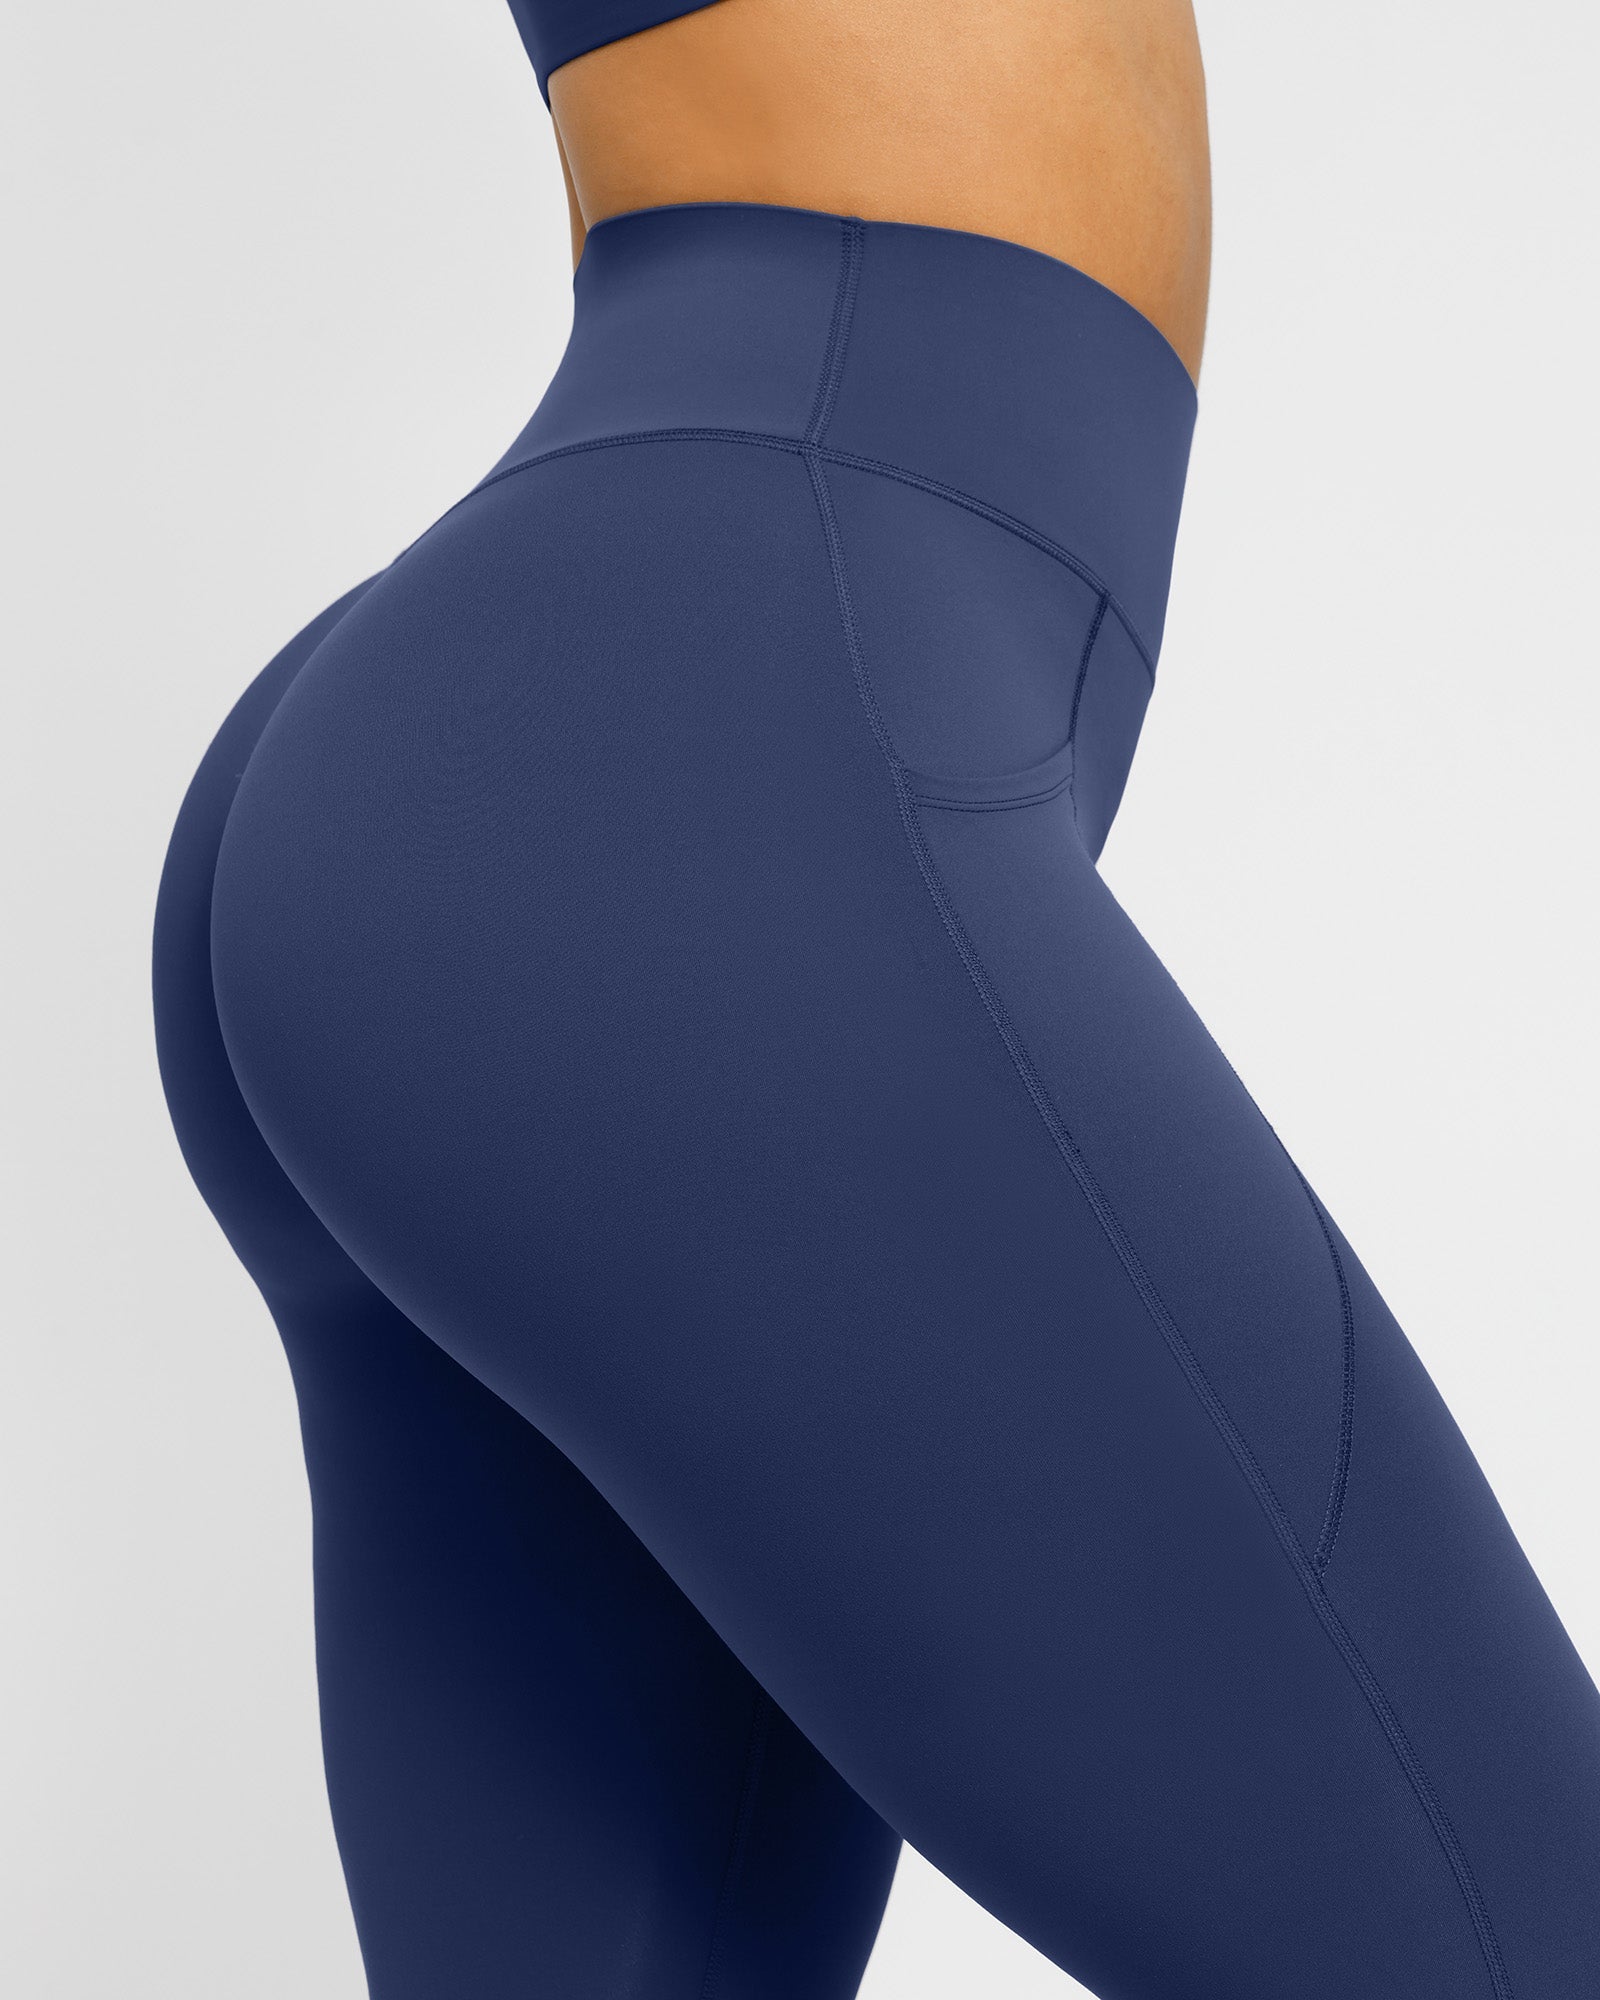 💥 Built-In Thong Soft Smoothing Legging Say goodbye to those